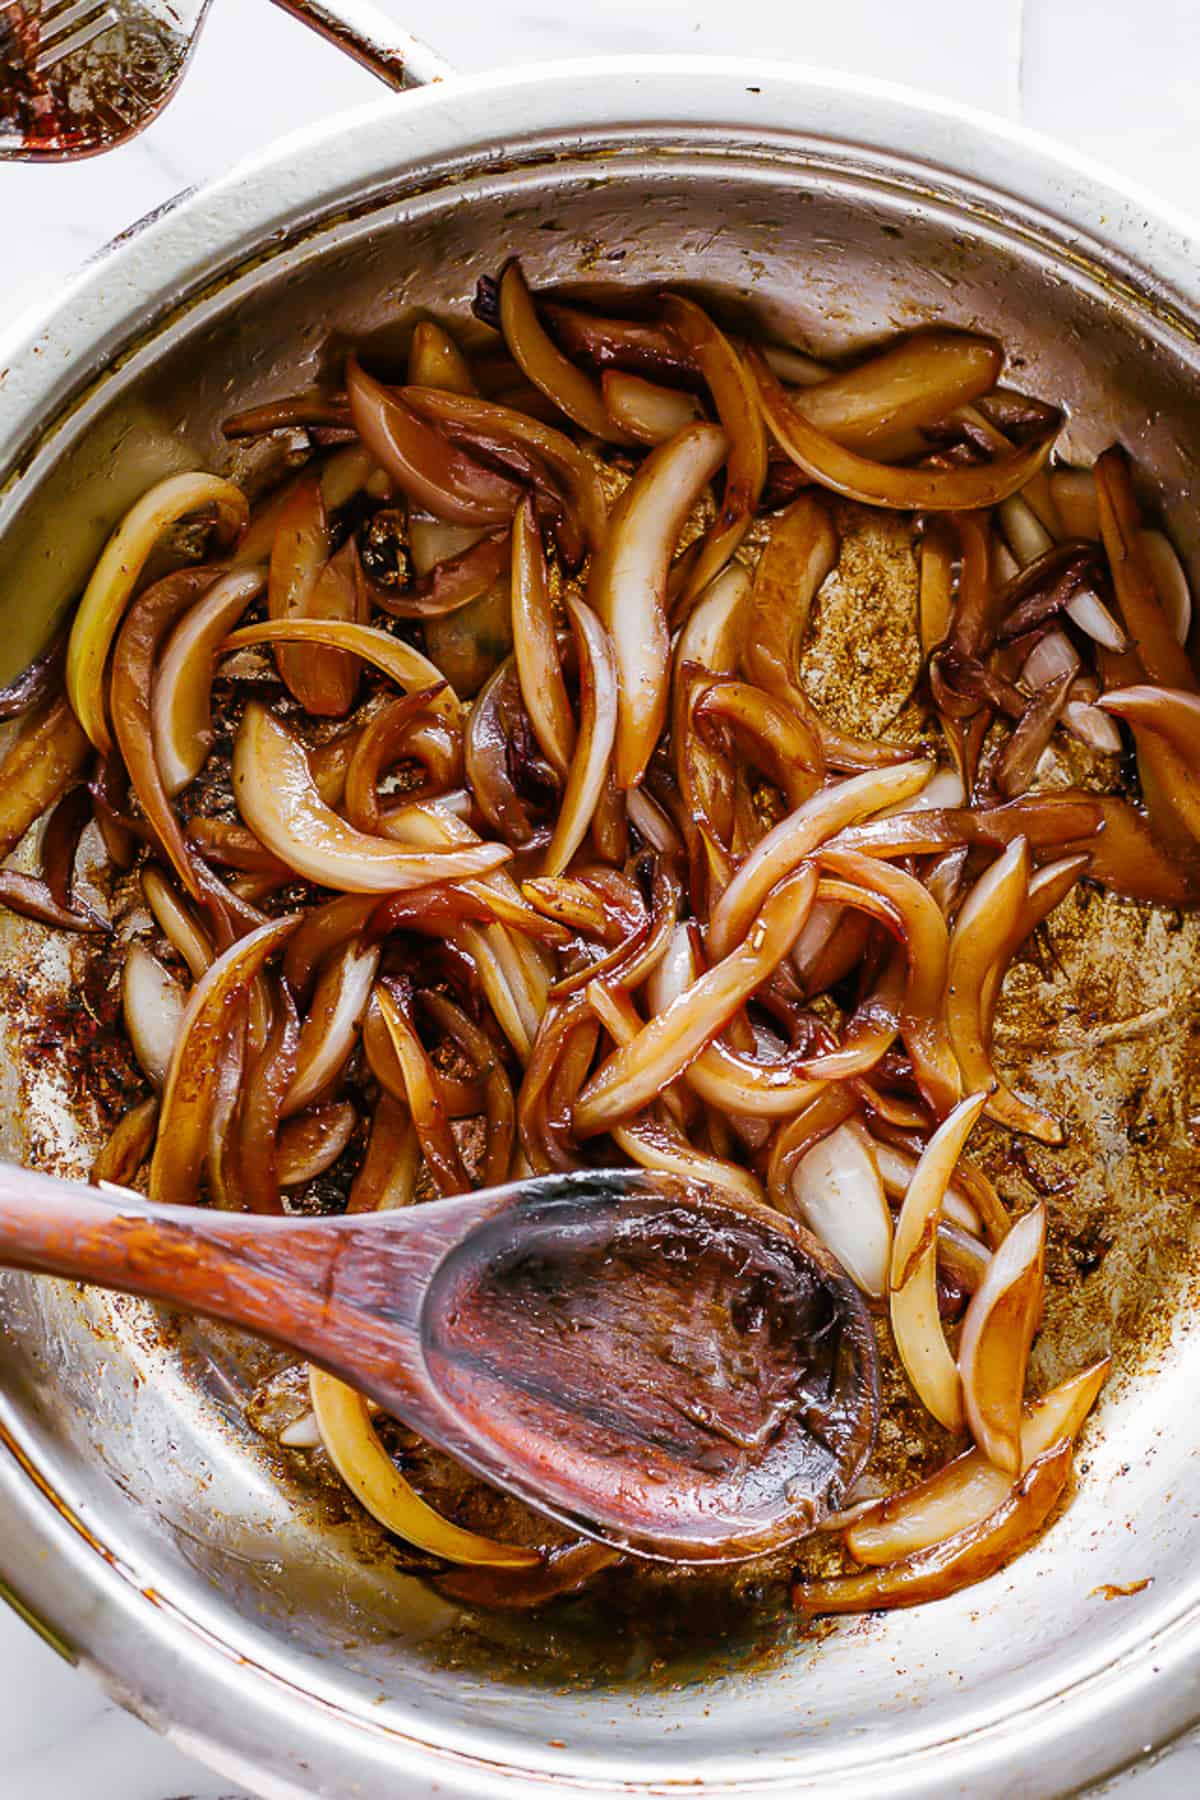 Onions caramelizing in a stainless steel skillet.